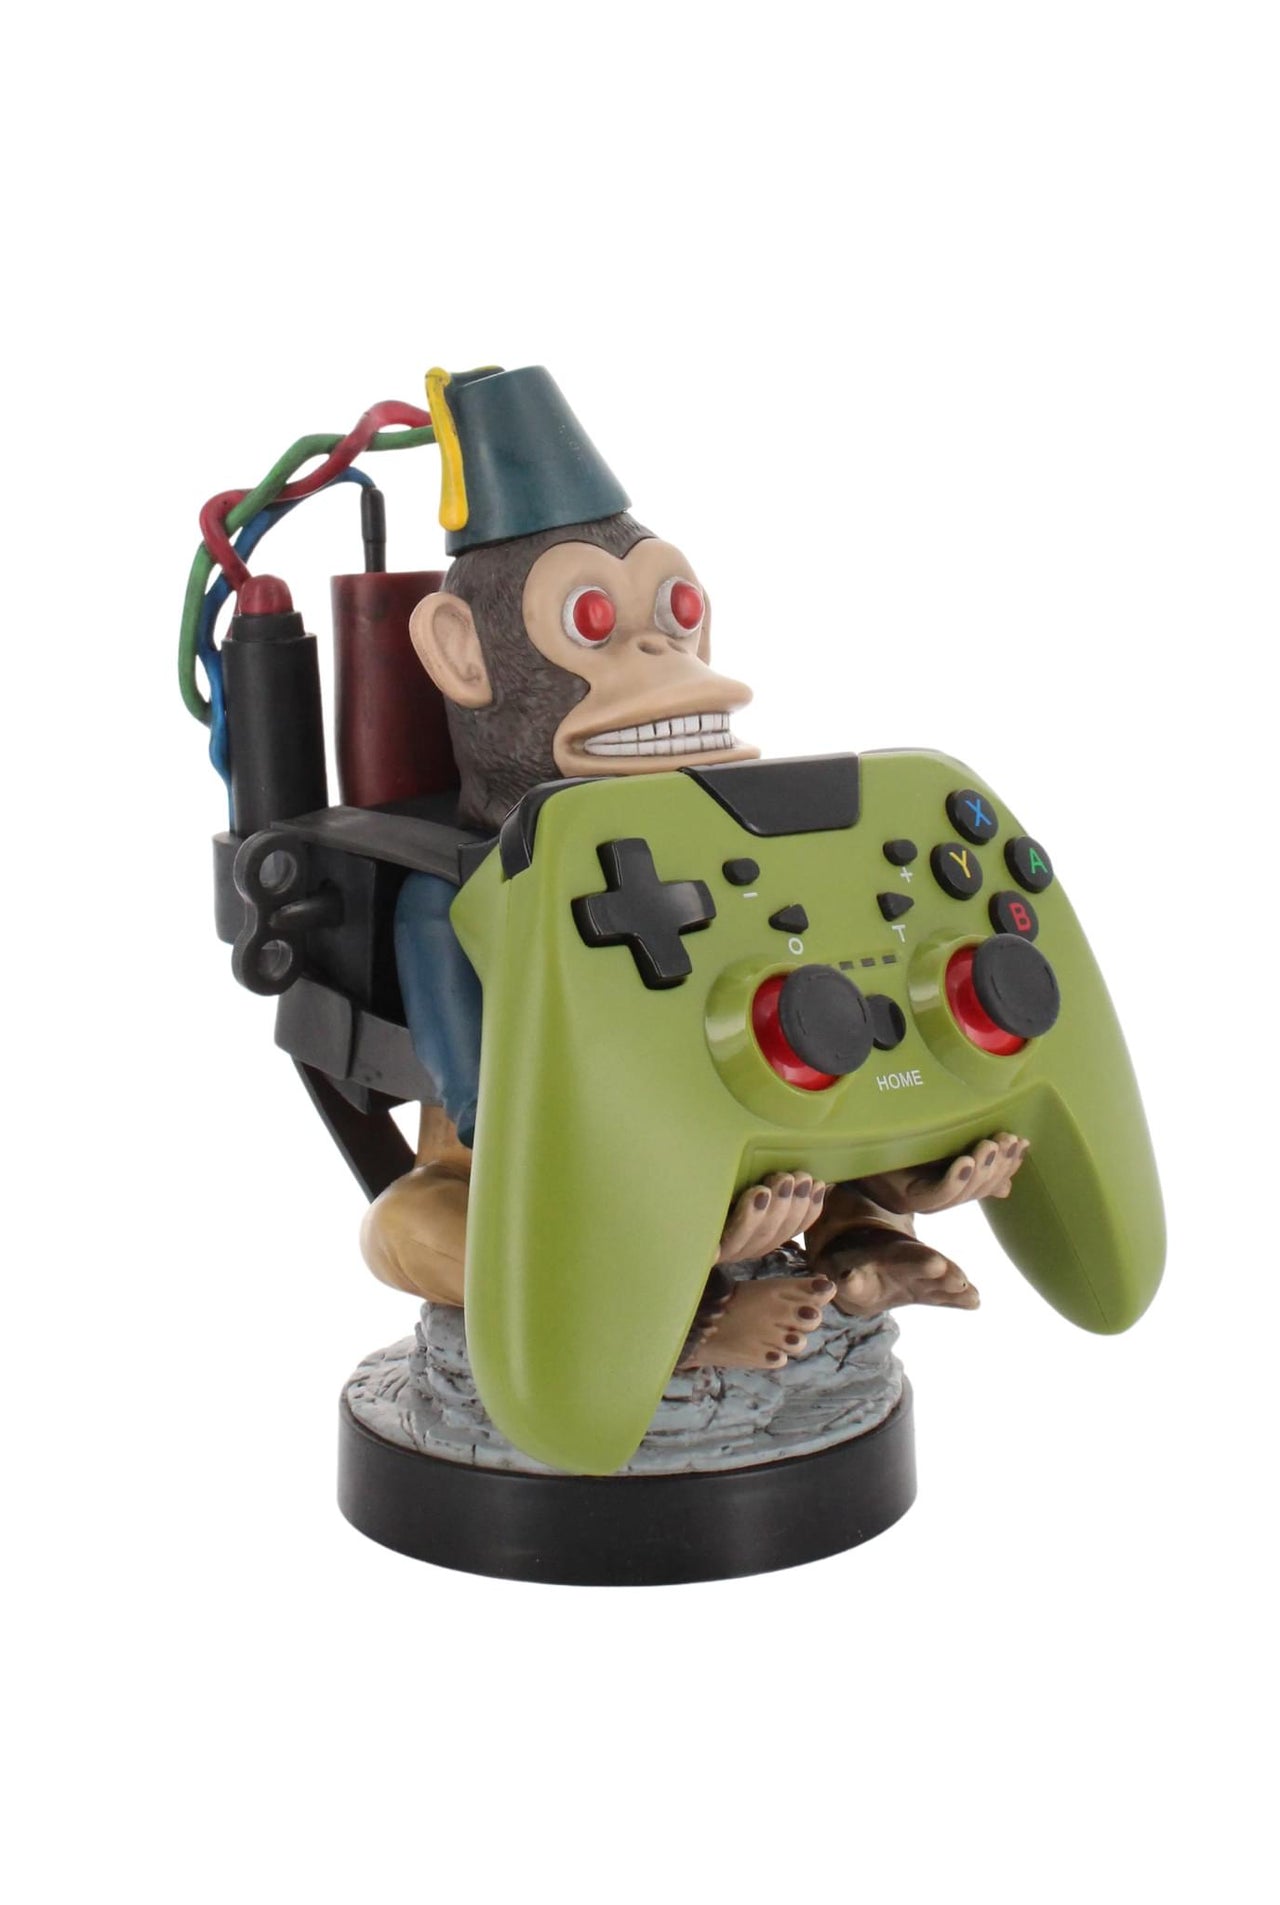 Call of Duty: Monkey Bomb Cable Guys Original Controller and Phone Holder - EXG Pro